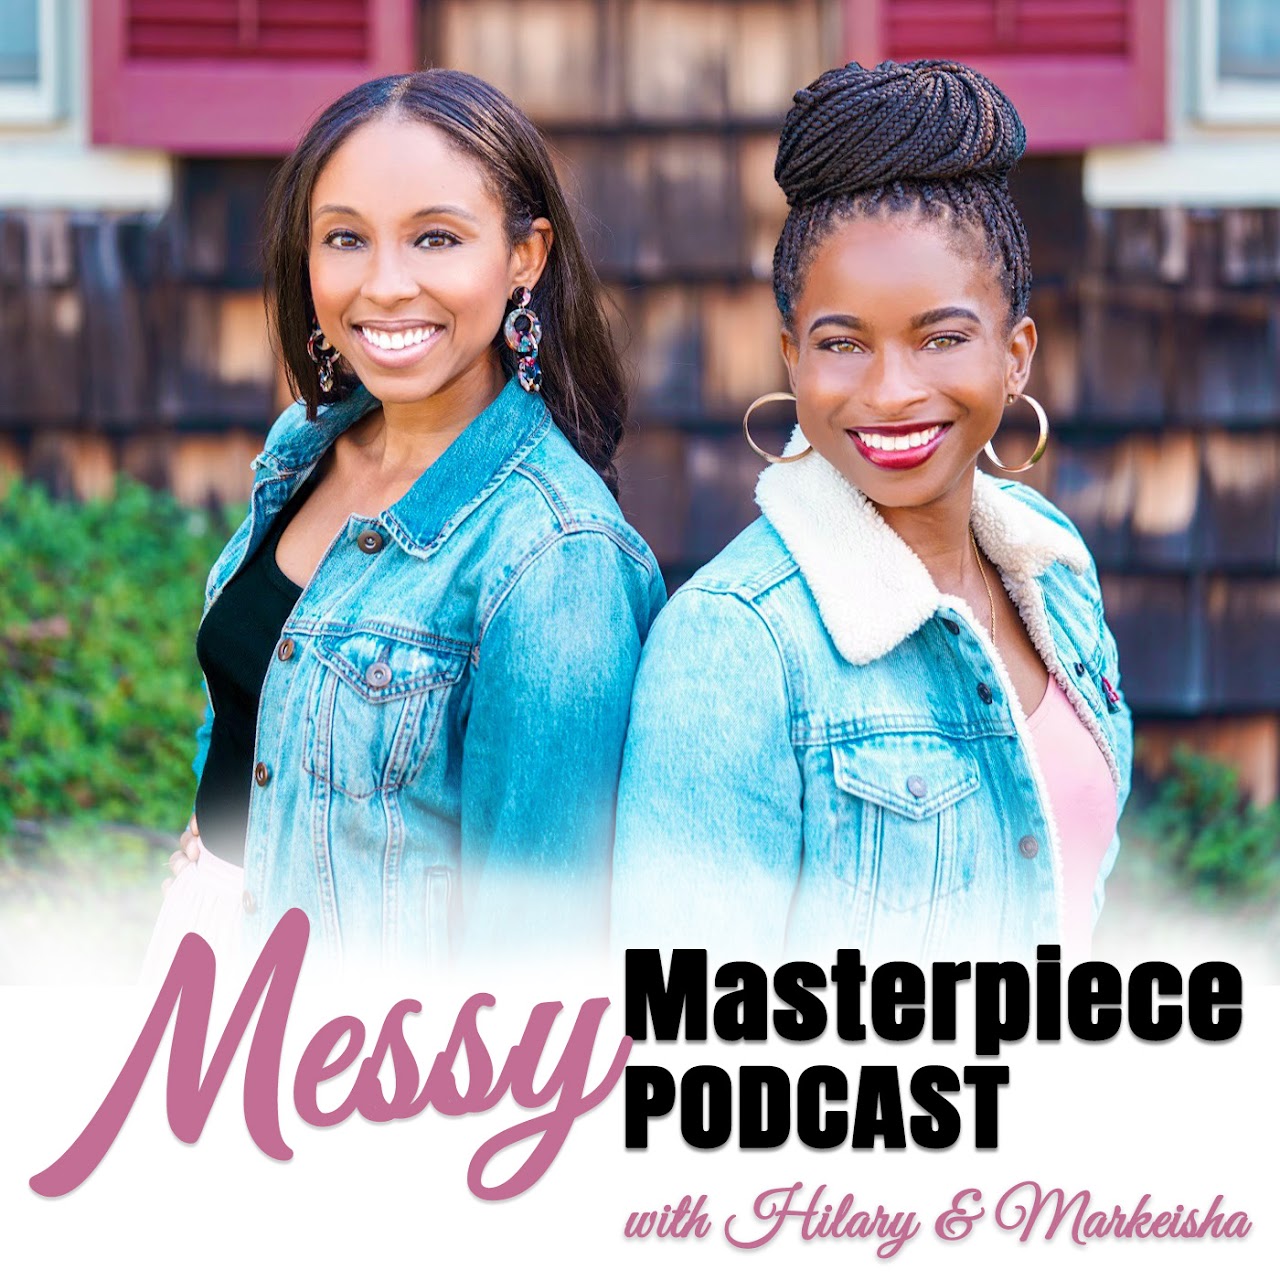 Messy Masterpiece Podcast